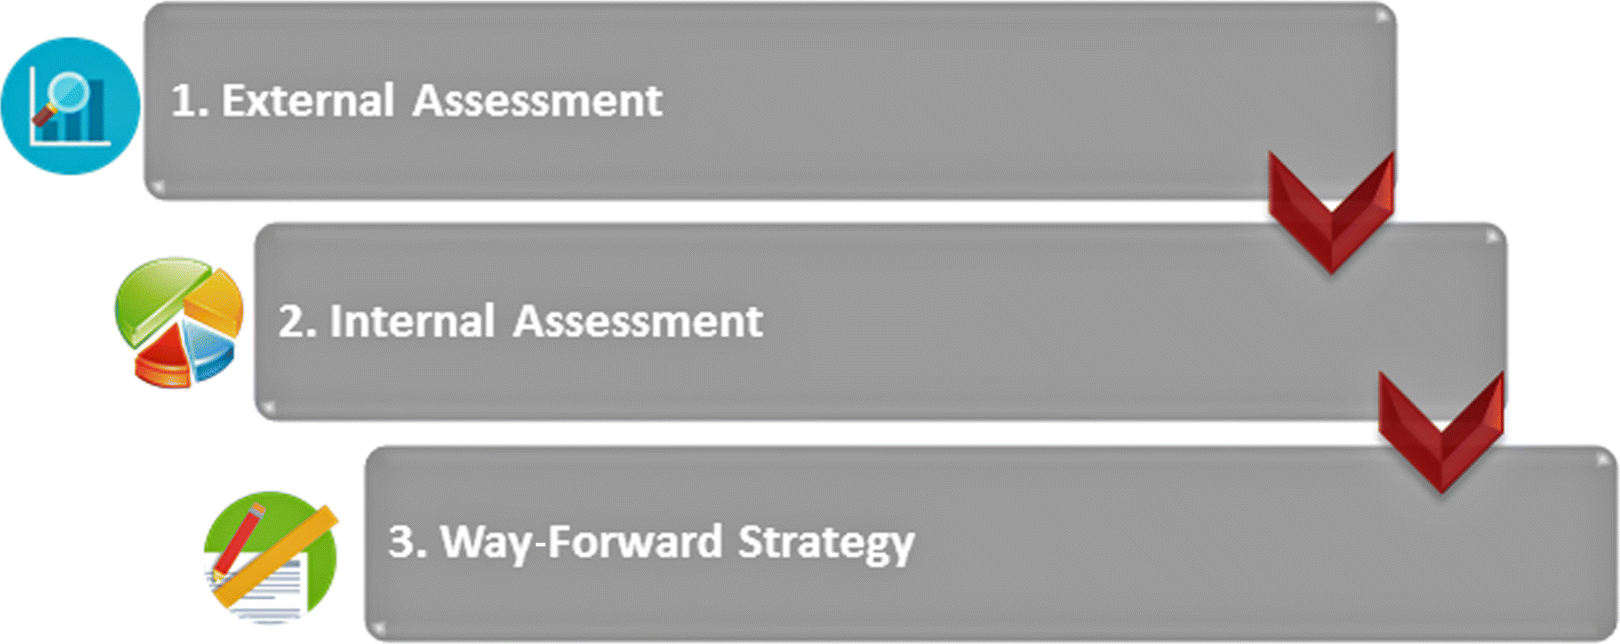 Figure indicating the three components of strategy. The first is external assessment, second is internal assessment, and the third is way-forward strategy.